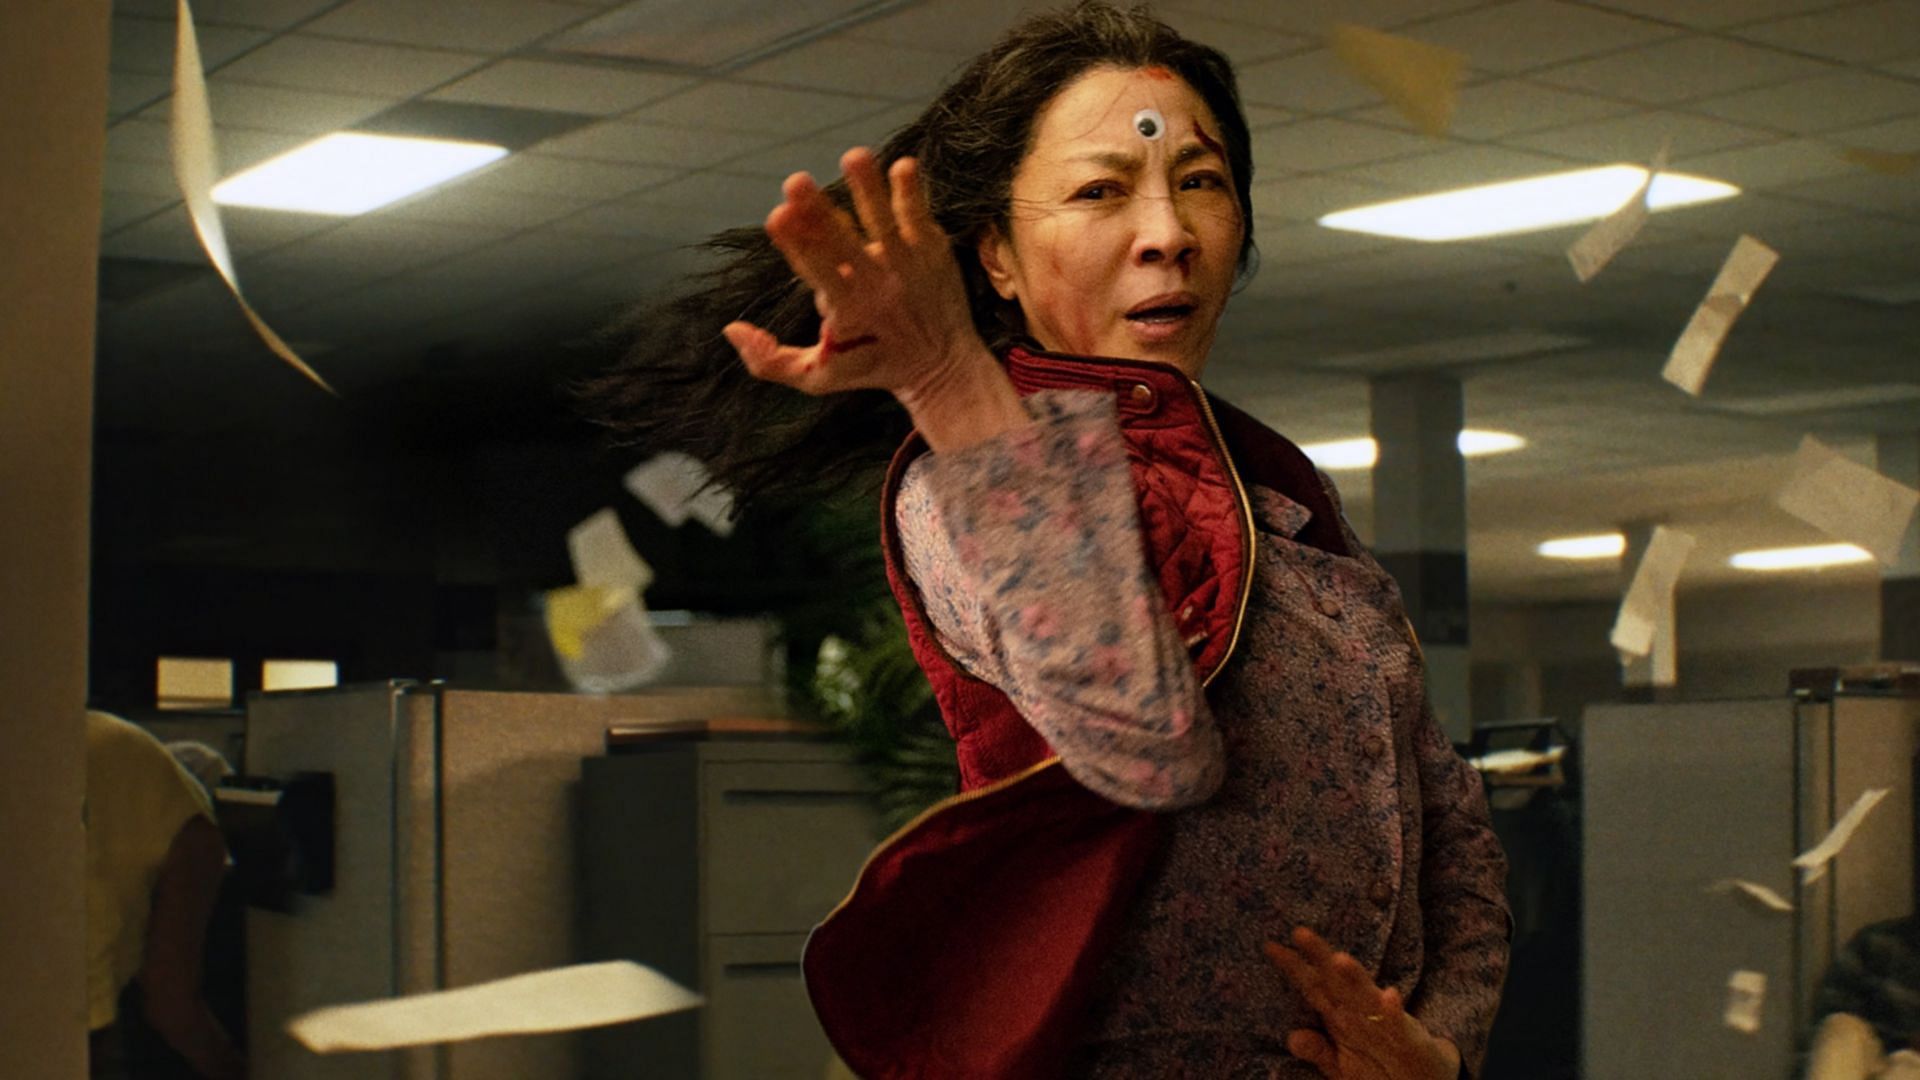 Michelle Yeoh has been nominated for an Oscar (Image via IMDb)